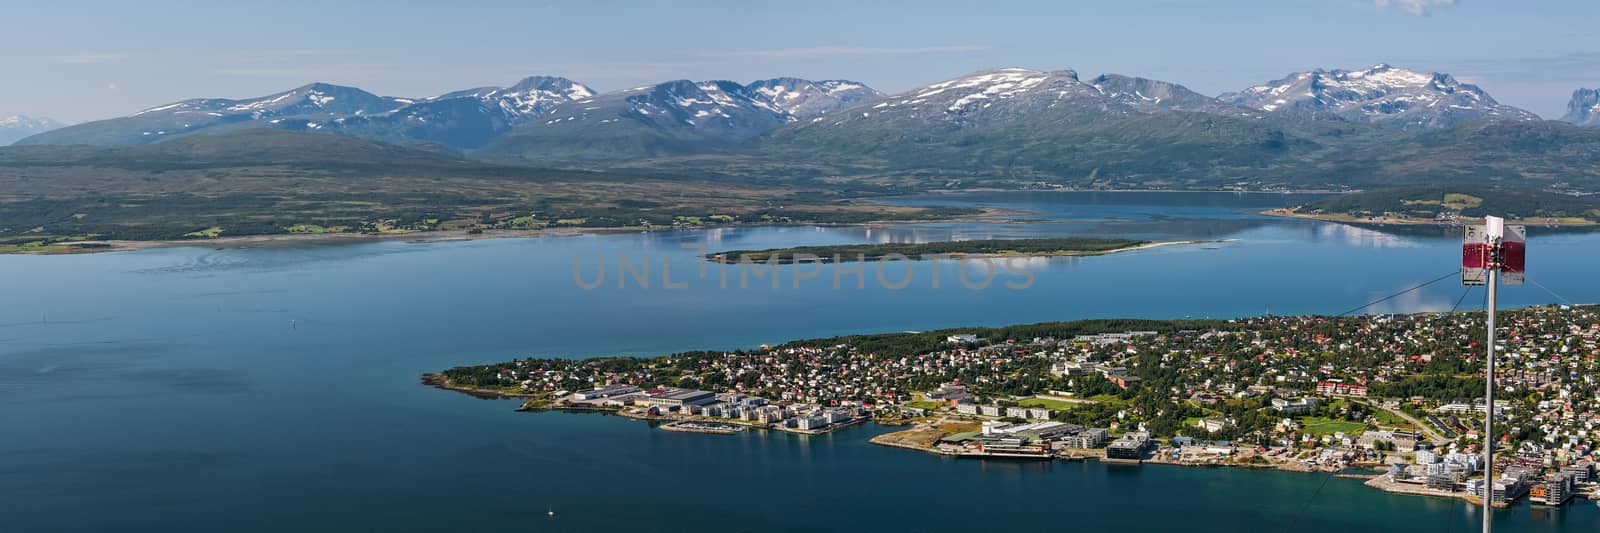 Panoramic view of Tromso and mountains, Norway by LuigiMorbidelli